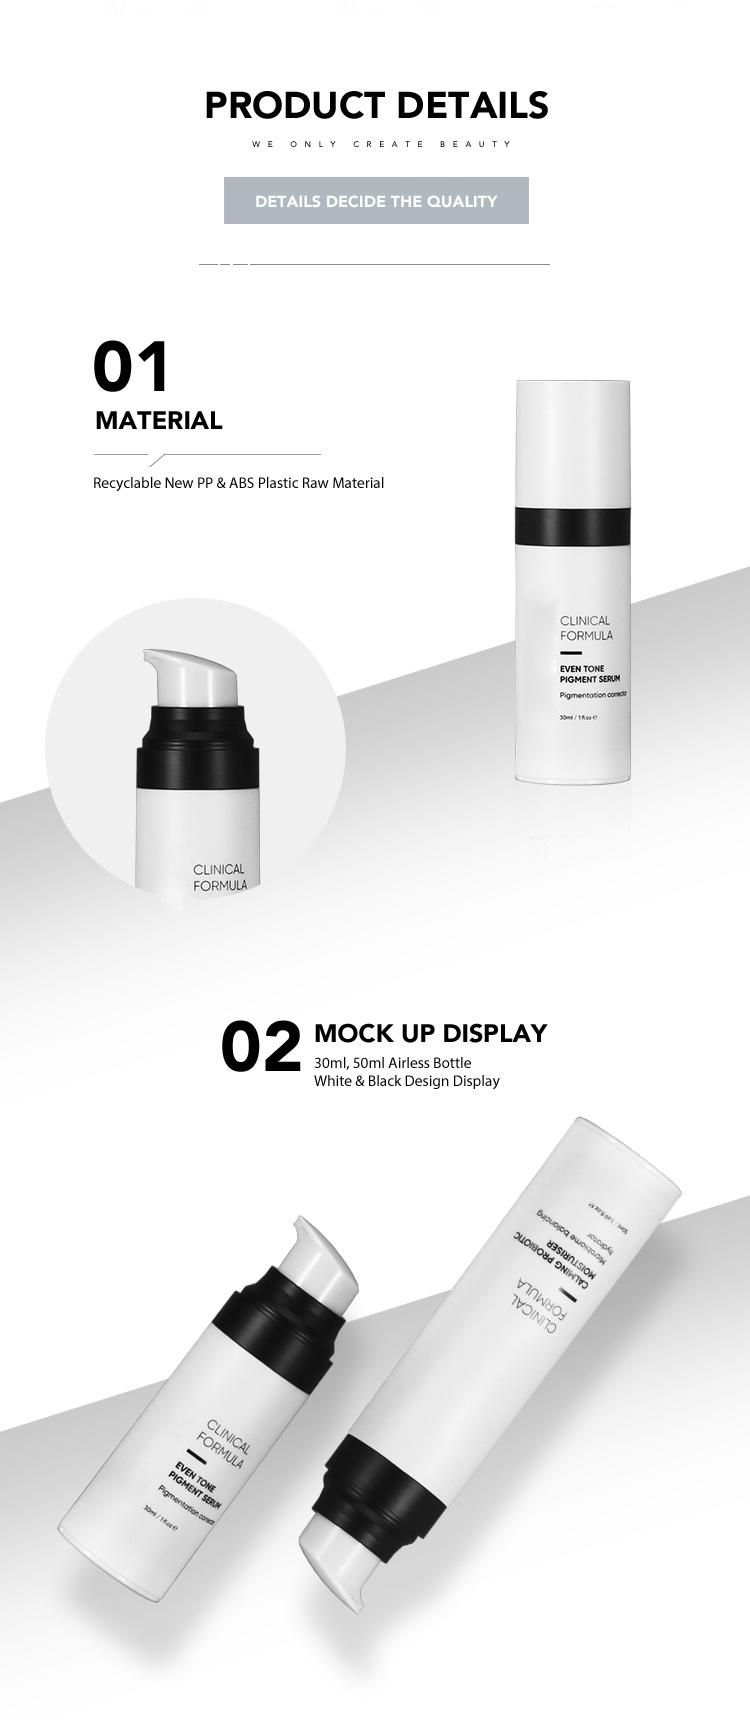 Black and White Cosmetic Skincare Airless Bottle